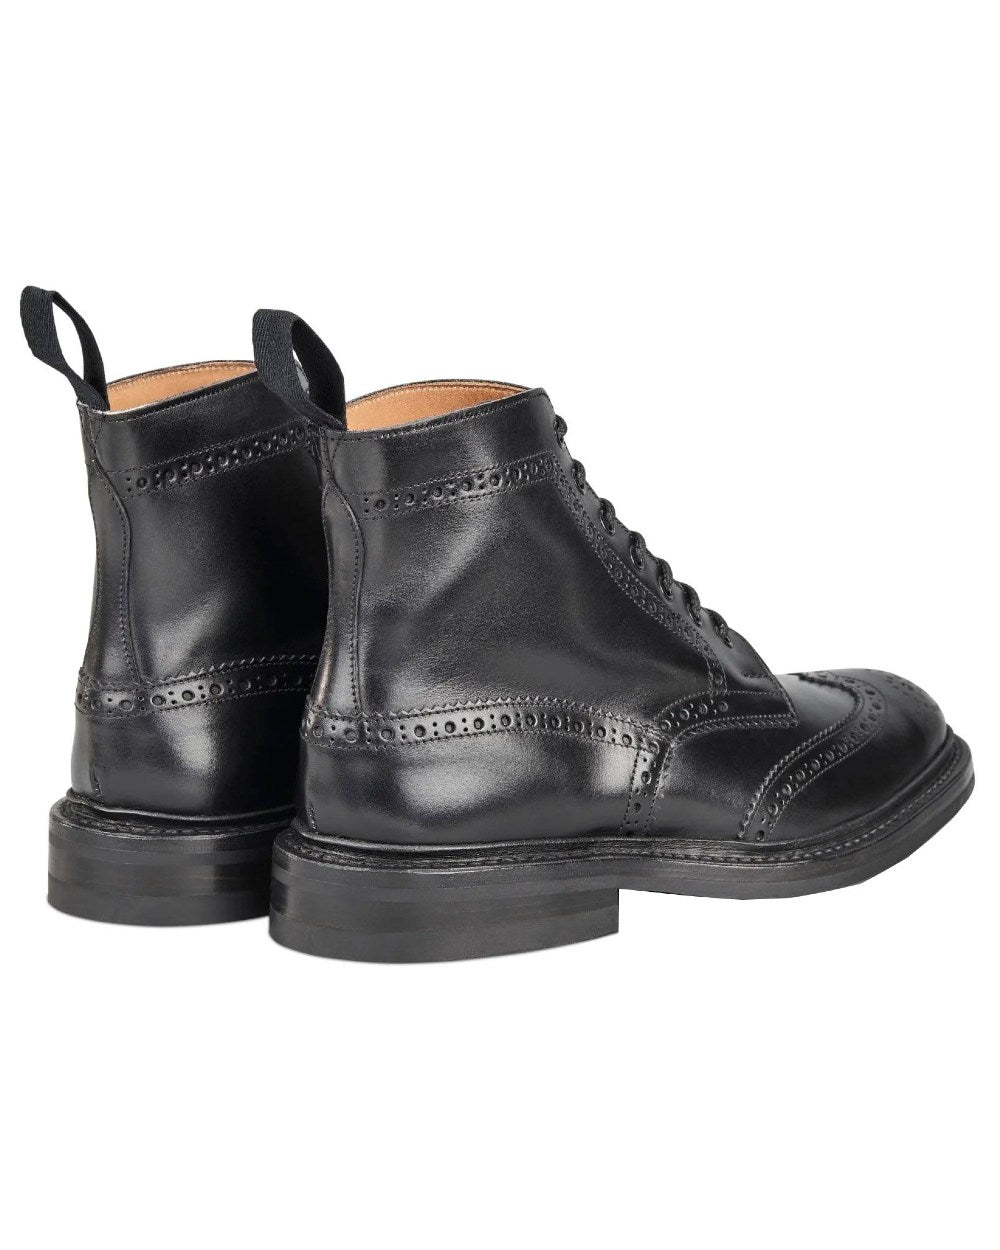 Black Coloured Trickers Stow Leather Sole Country Boot On A White Background 